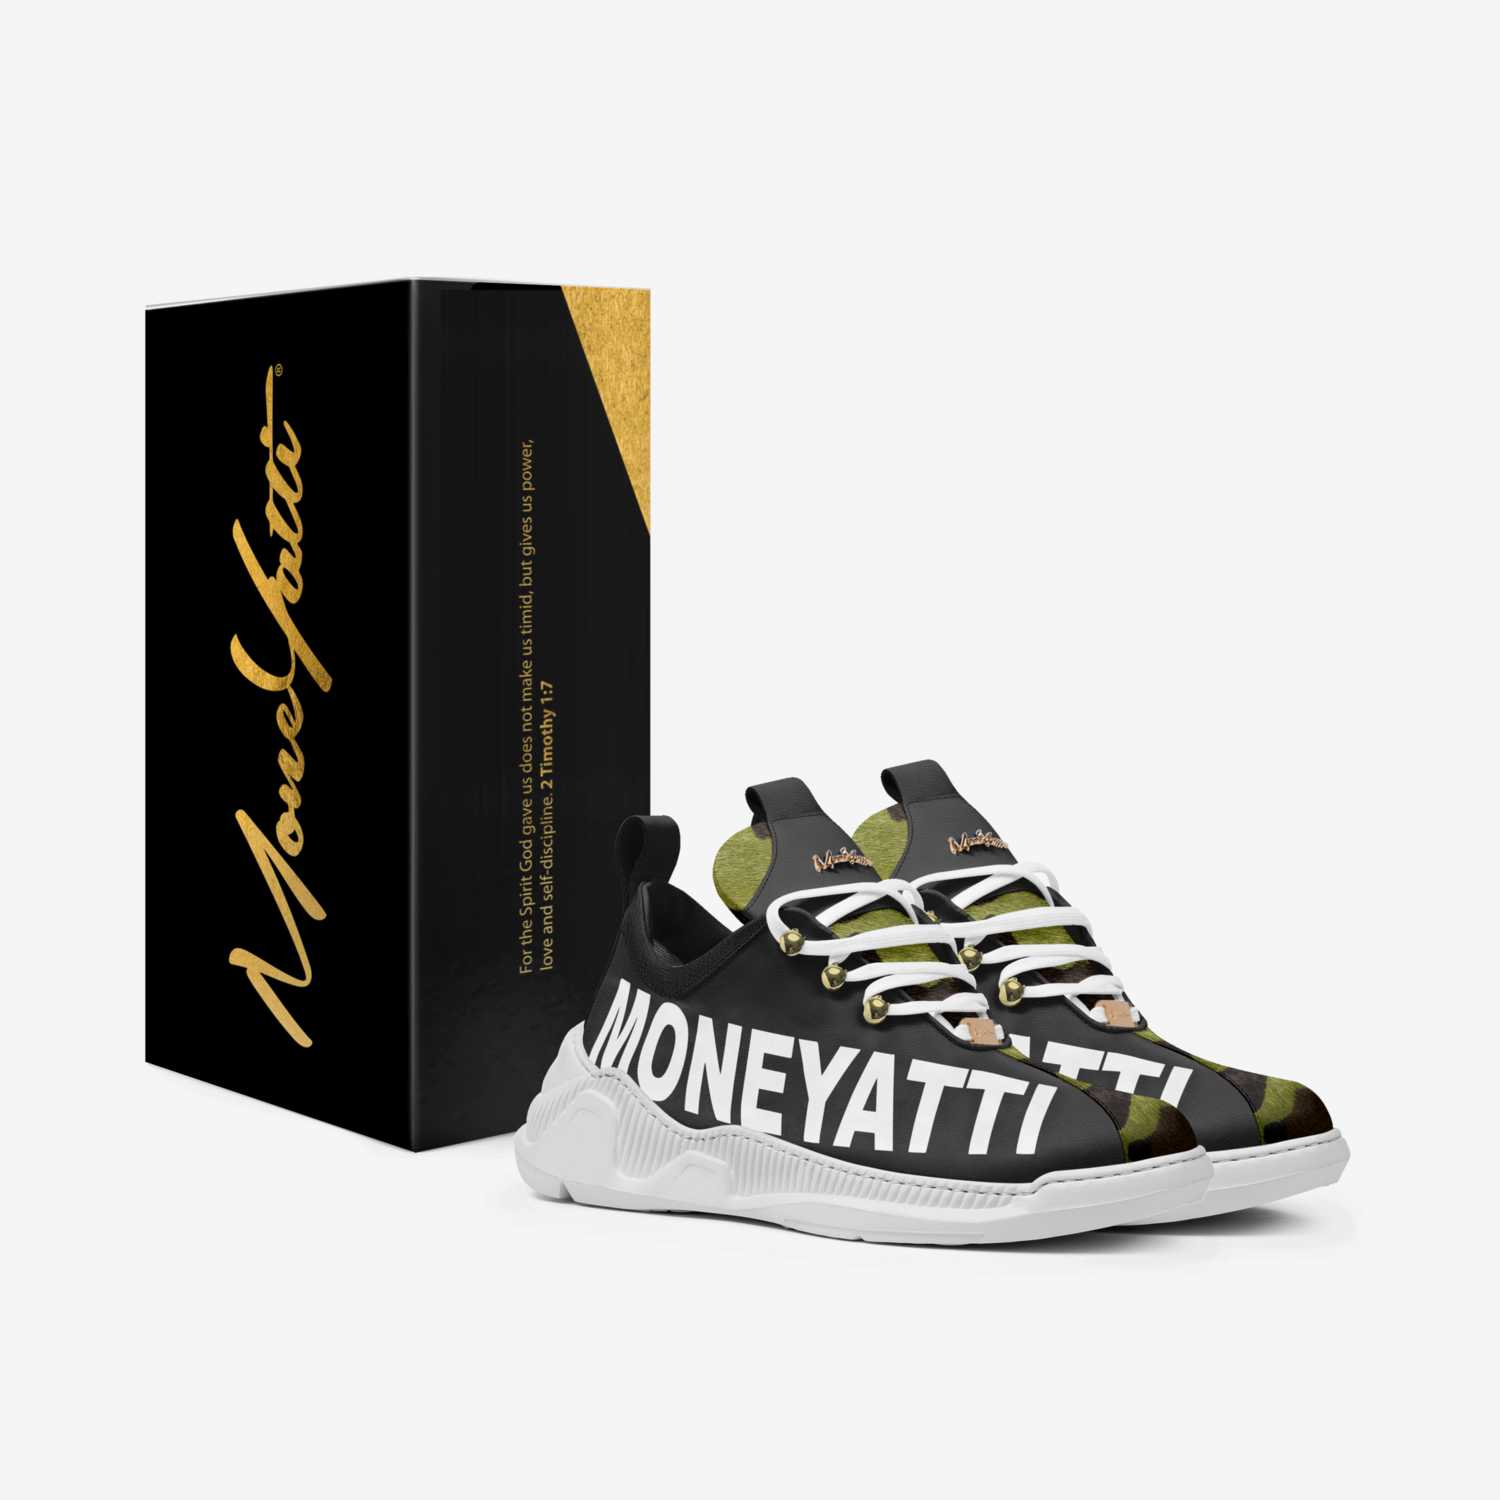 Sig20 custom made in Italy shoes by Moneyatti Brand | Box view